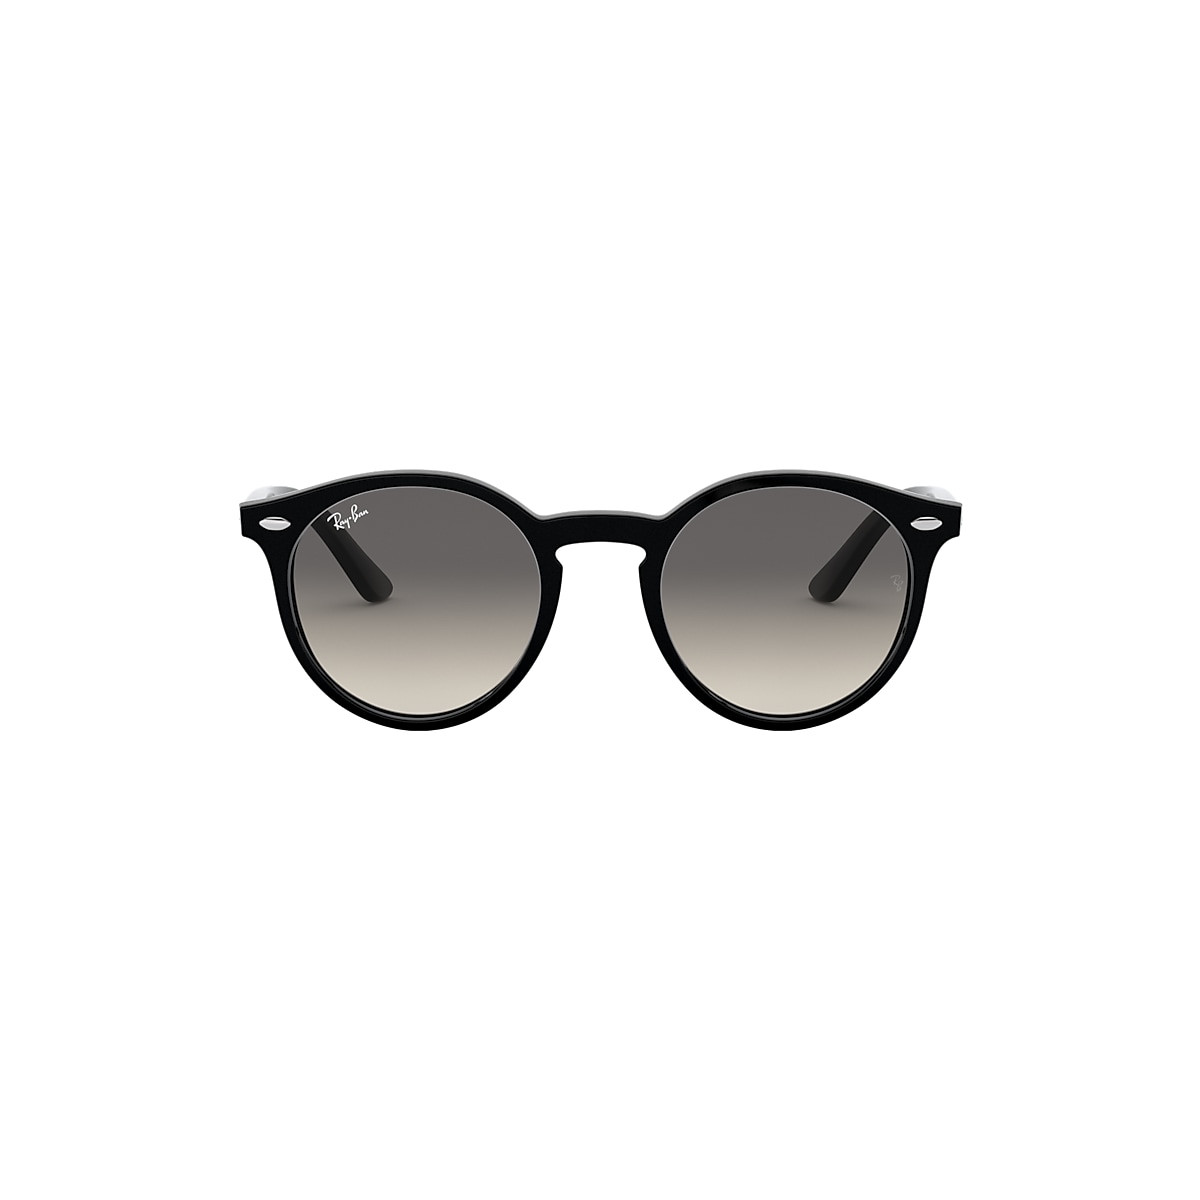 RB9064S KIDS Sunglasses in Black and Grey - RB9064S | Ray-Ban® US